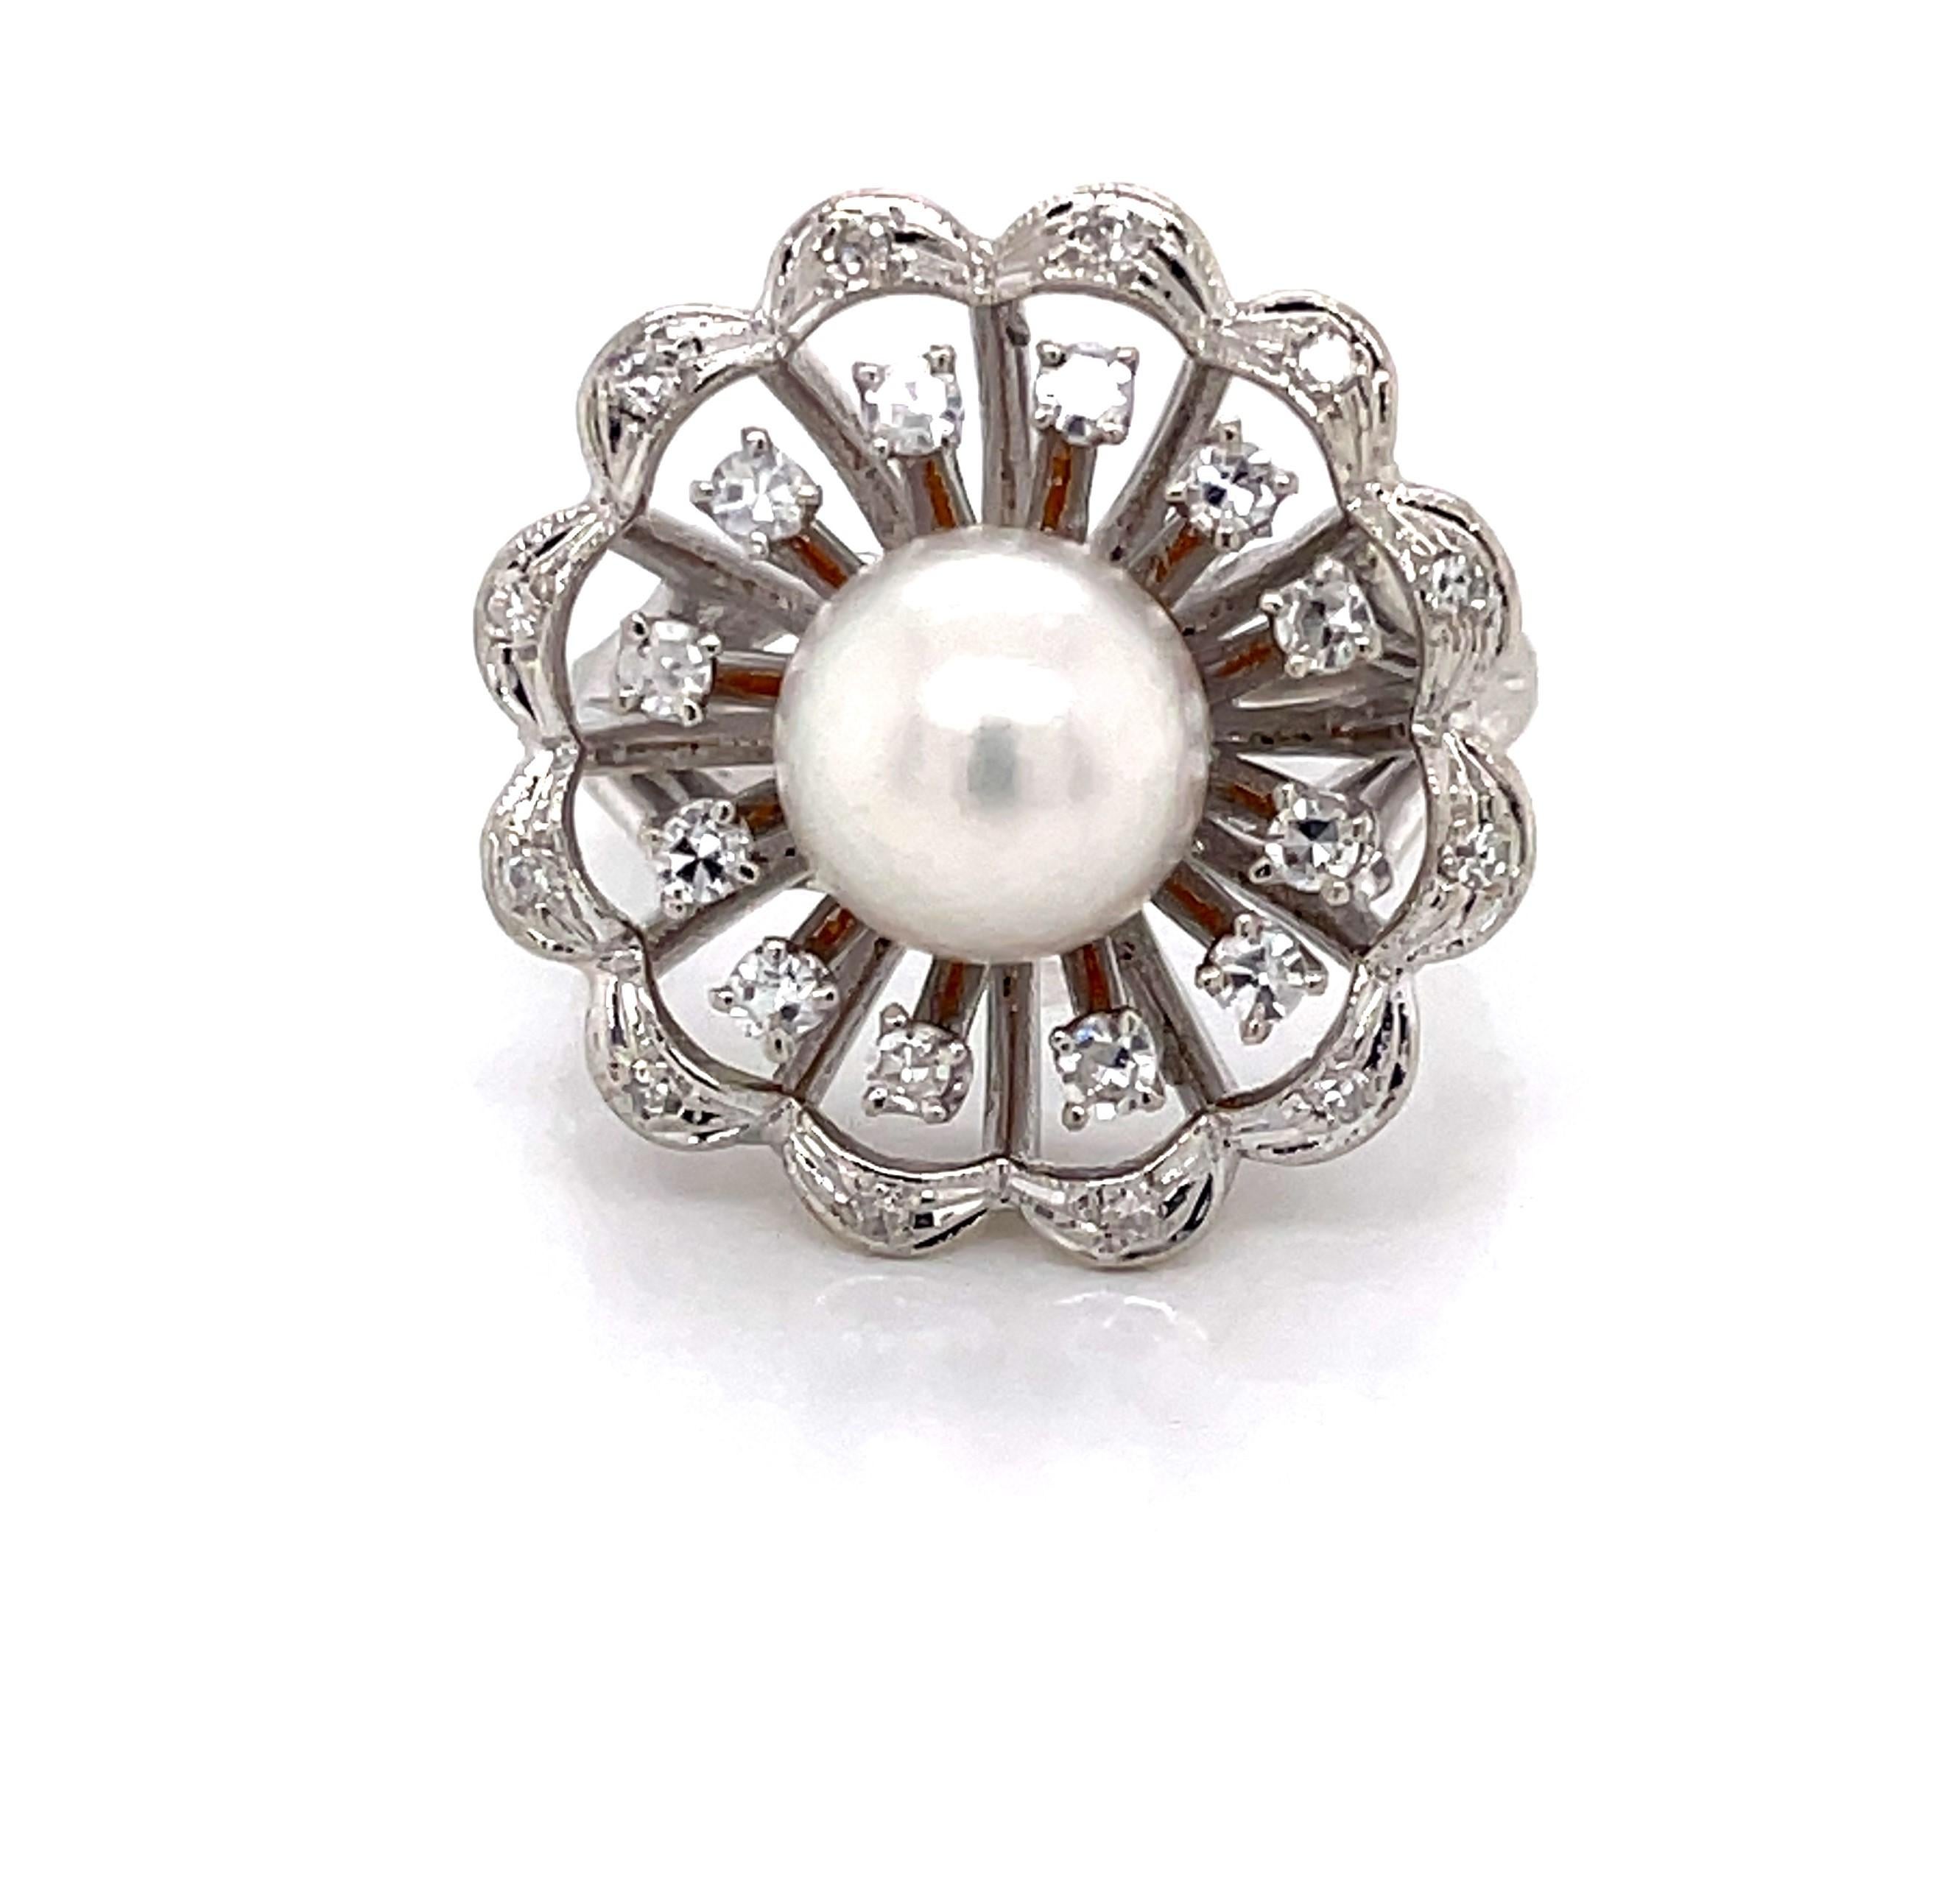 Appreciate the beautiful bloom of this vintage floral inspired pearl diamond fourteen karat 14K white gold cocktail ring. With a lacey look, continuous scalloped gold metalwork forms twelve petals, each adorned with a single faceted round diamond. 